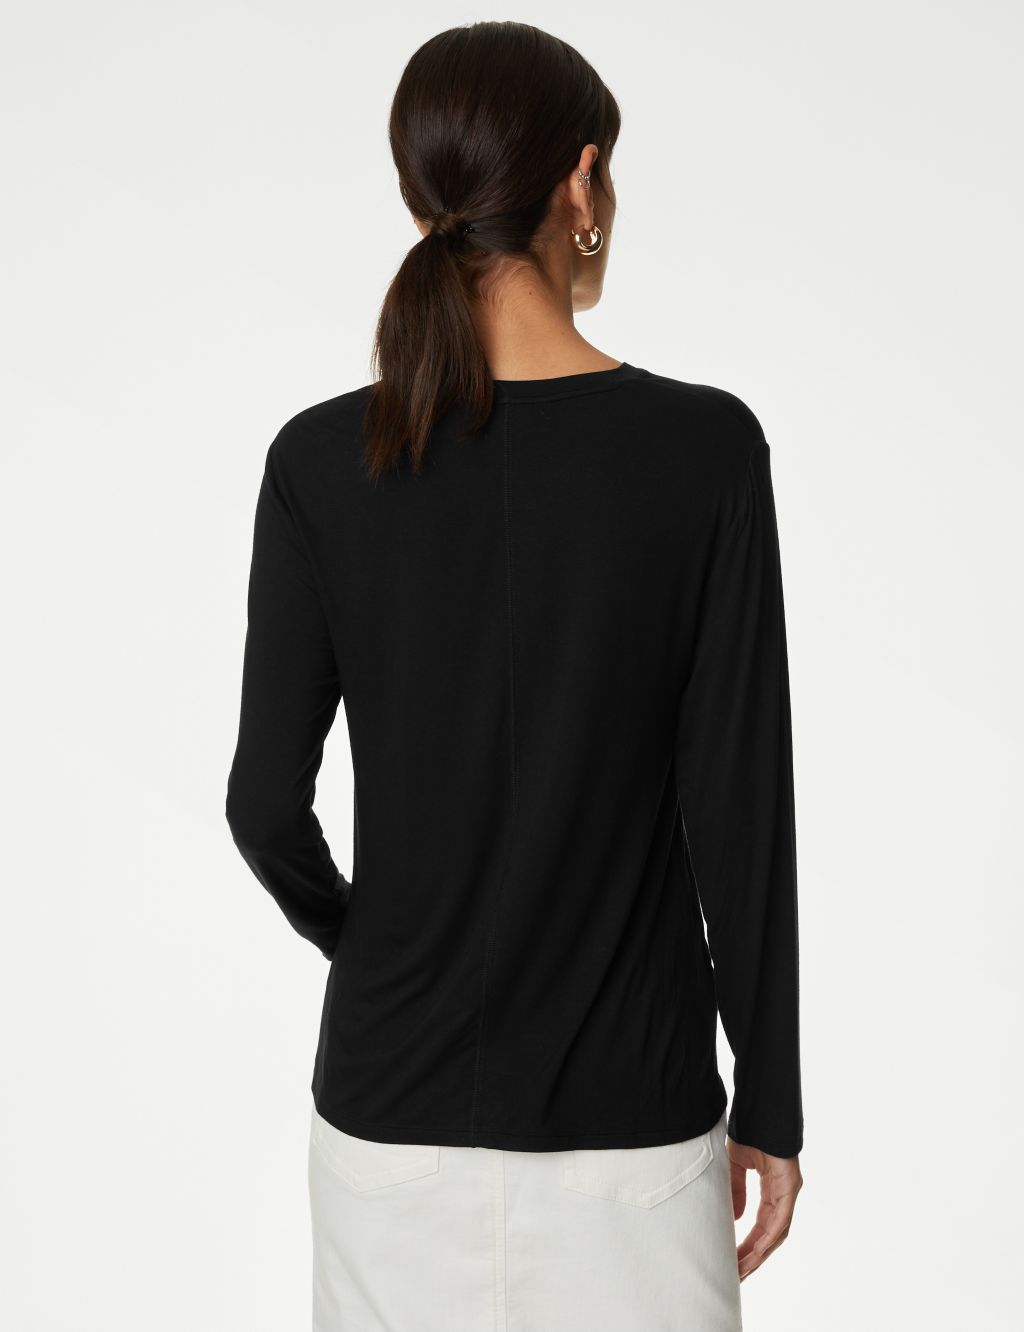 Round Neck Long Sleeve Top image 5